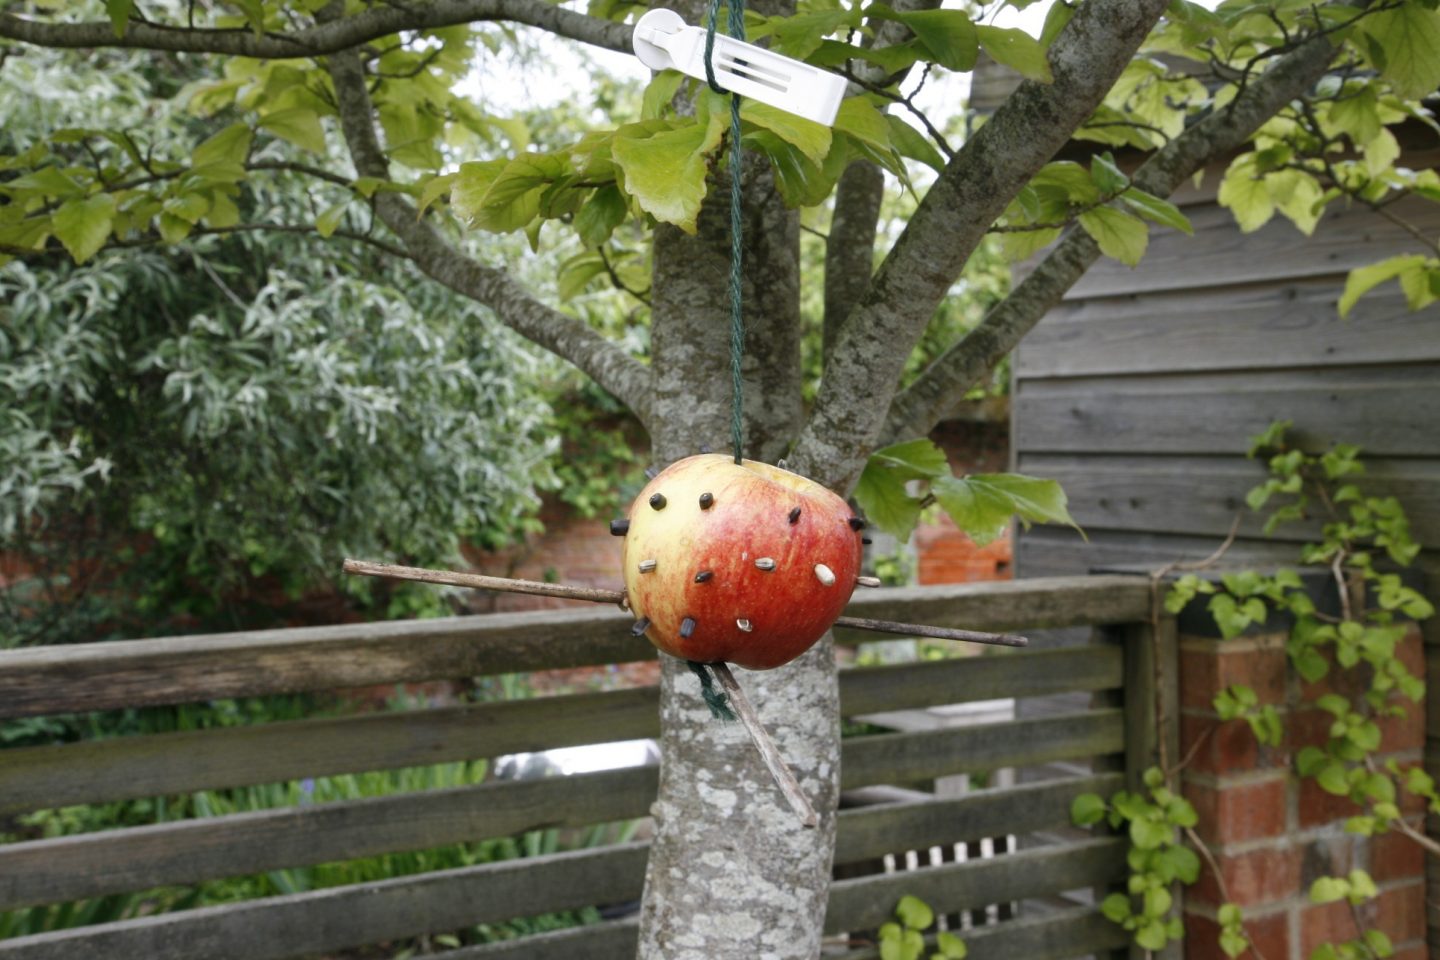 A finished apple bird feeder hanging from a branch in the garden